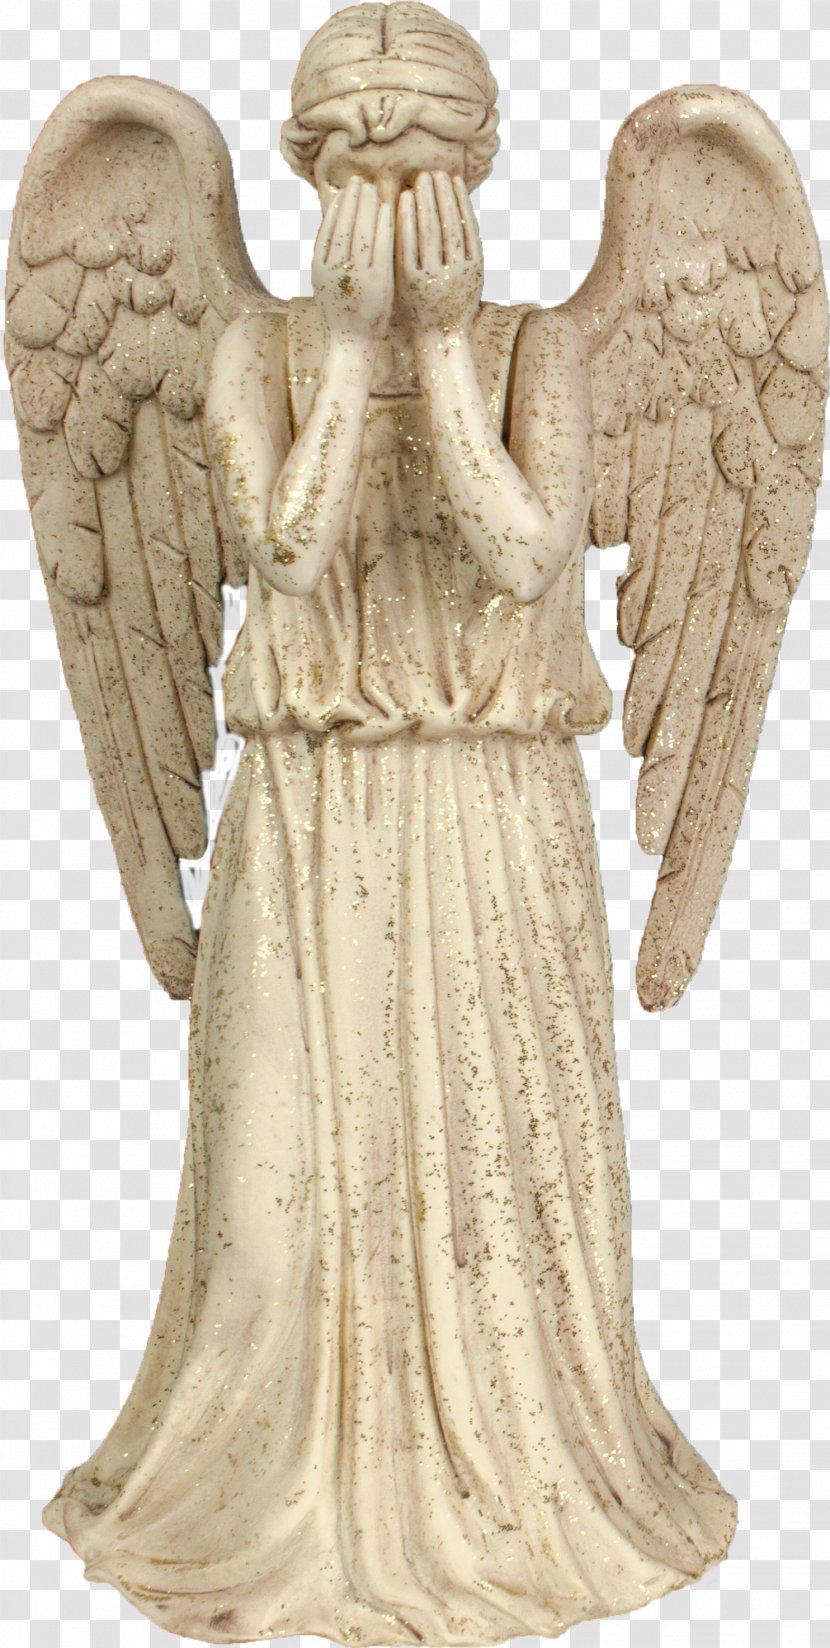 Tree-topper Christmas Ornament Weeping Angel - Star Of Bethlehem - Angels Transparent PNG